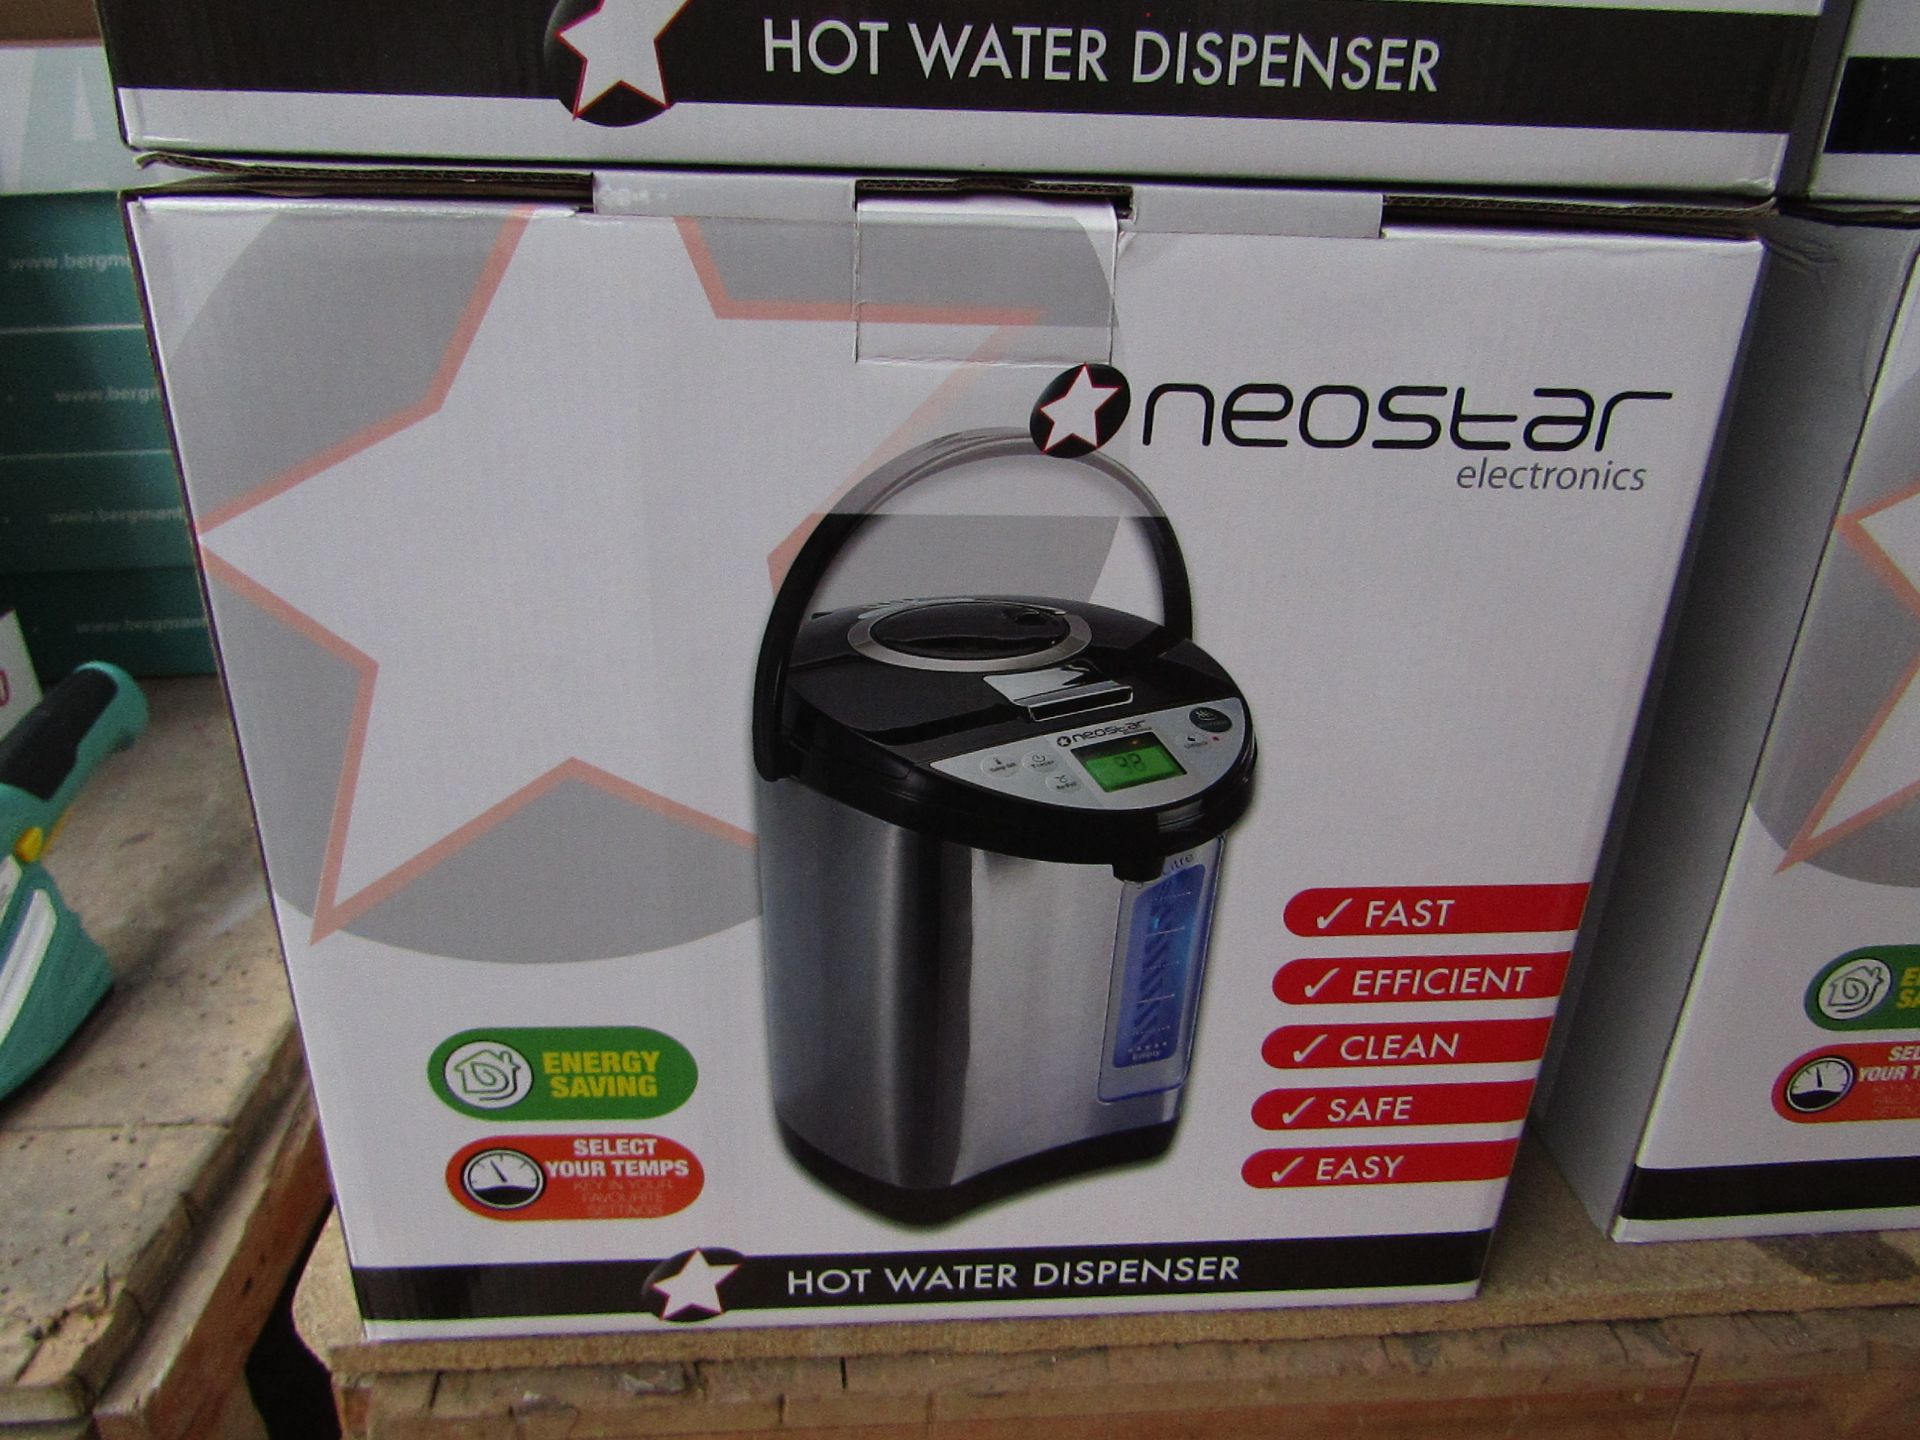 Neostar - Fast & Efficient Hot Water Diispenser - 3.5 Litre Capacity - Good Condition & Boxed.